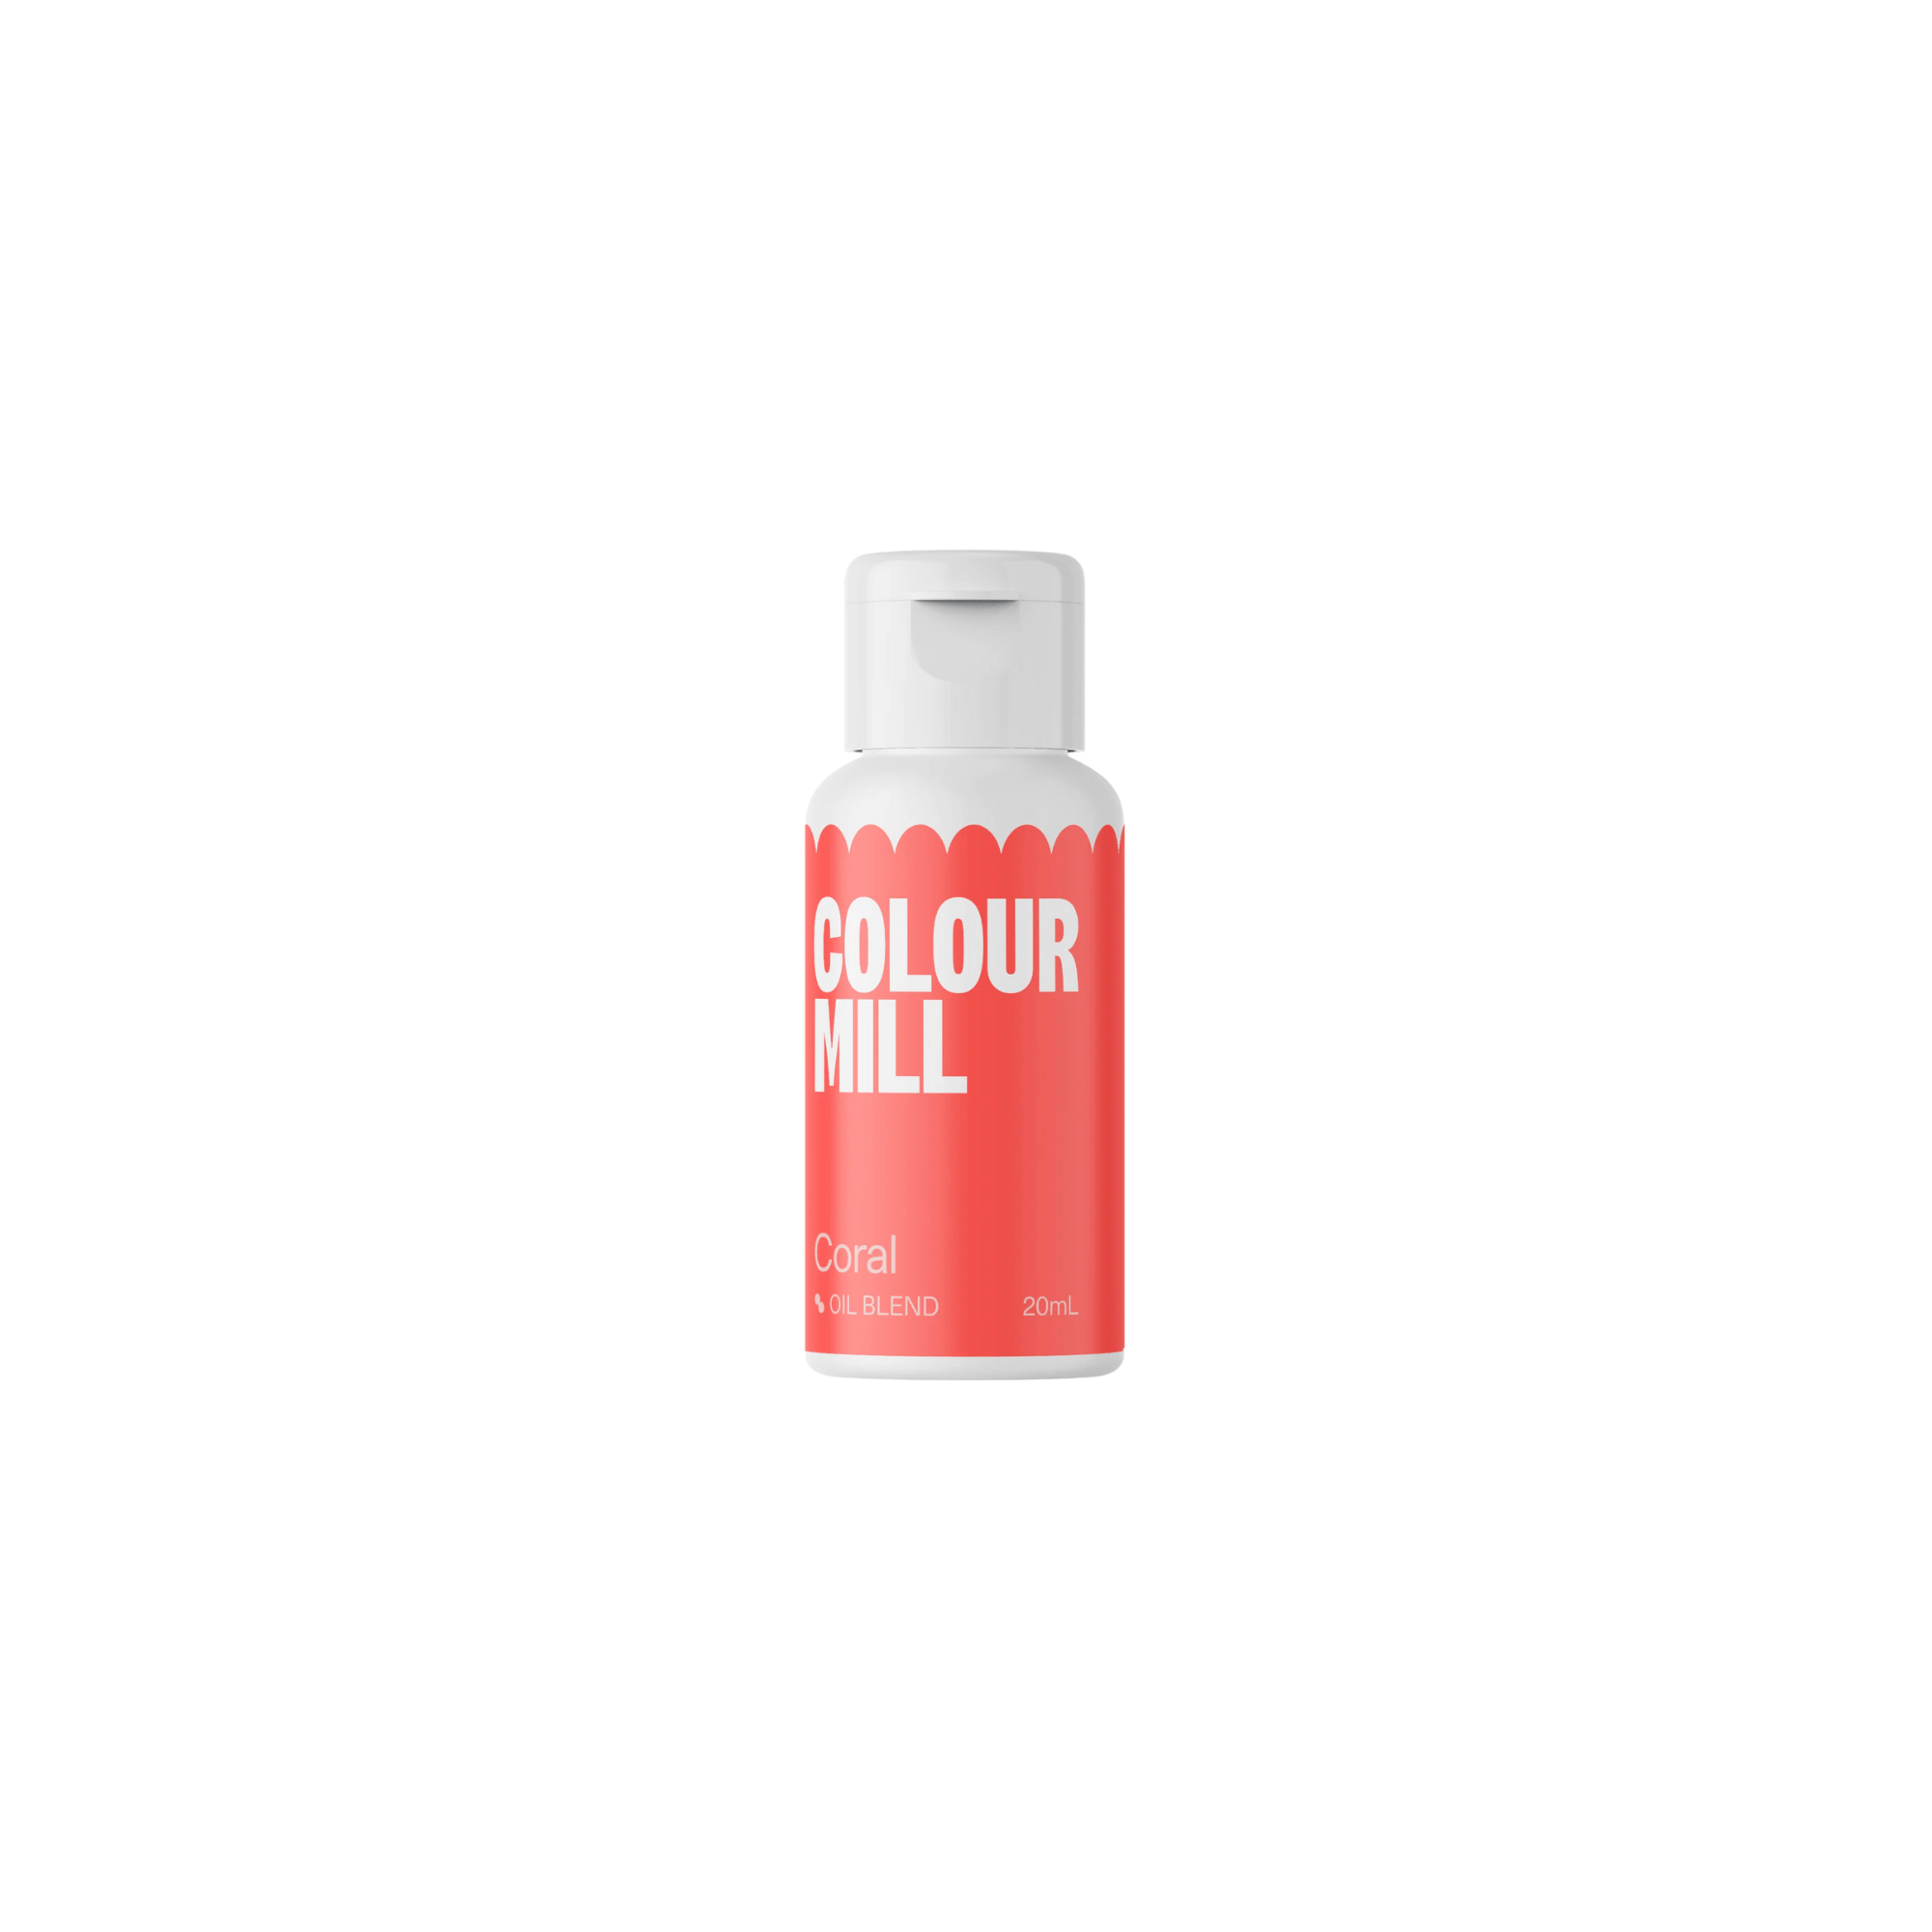 Happy Sprinkles Streusel 20ml Colour Mill Coral - Oil Blend